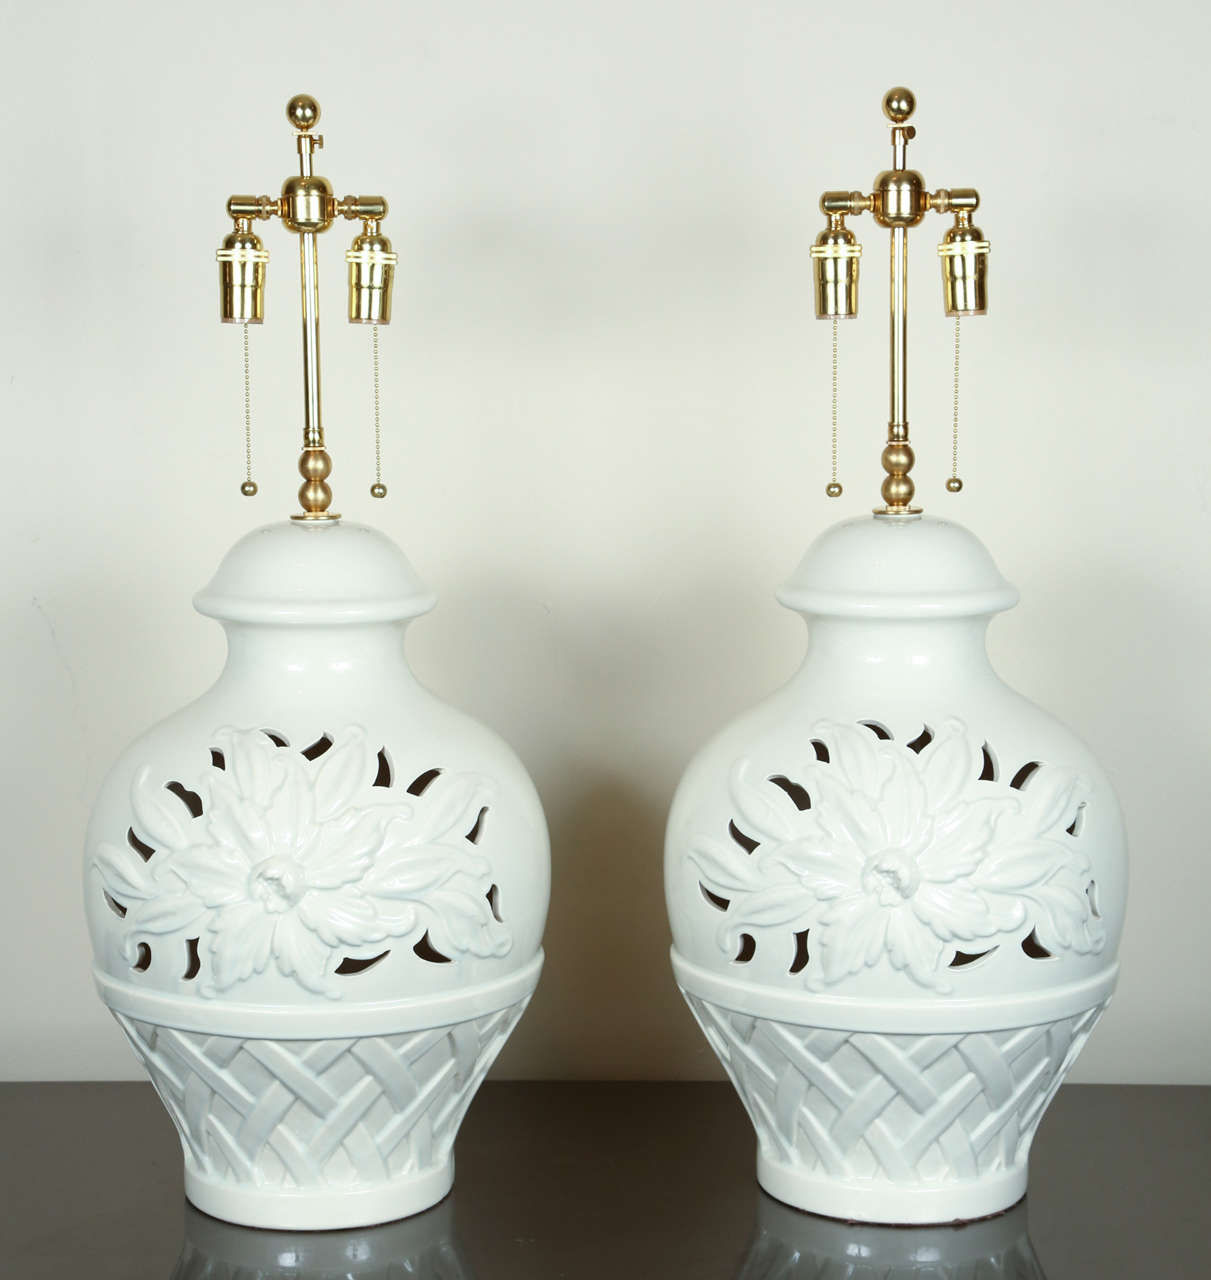 Pair of very large glazed ceramic lamps with a basket-of-flowers embossed and pierced design.  They are newly rewired with brass double clusters and silk rayon cord.